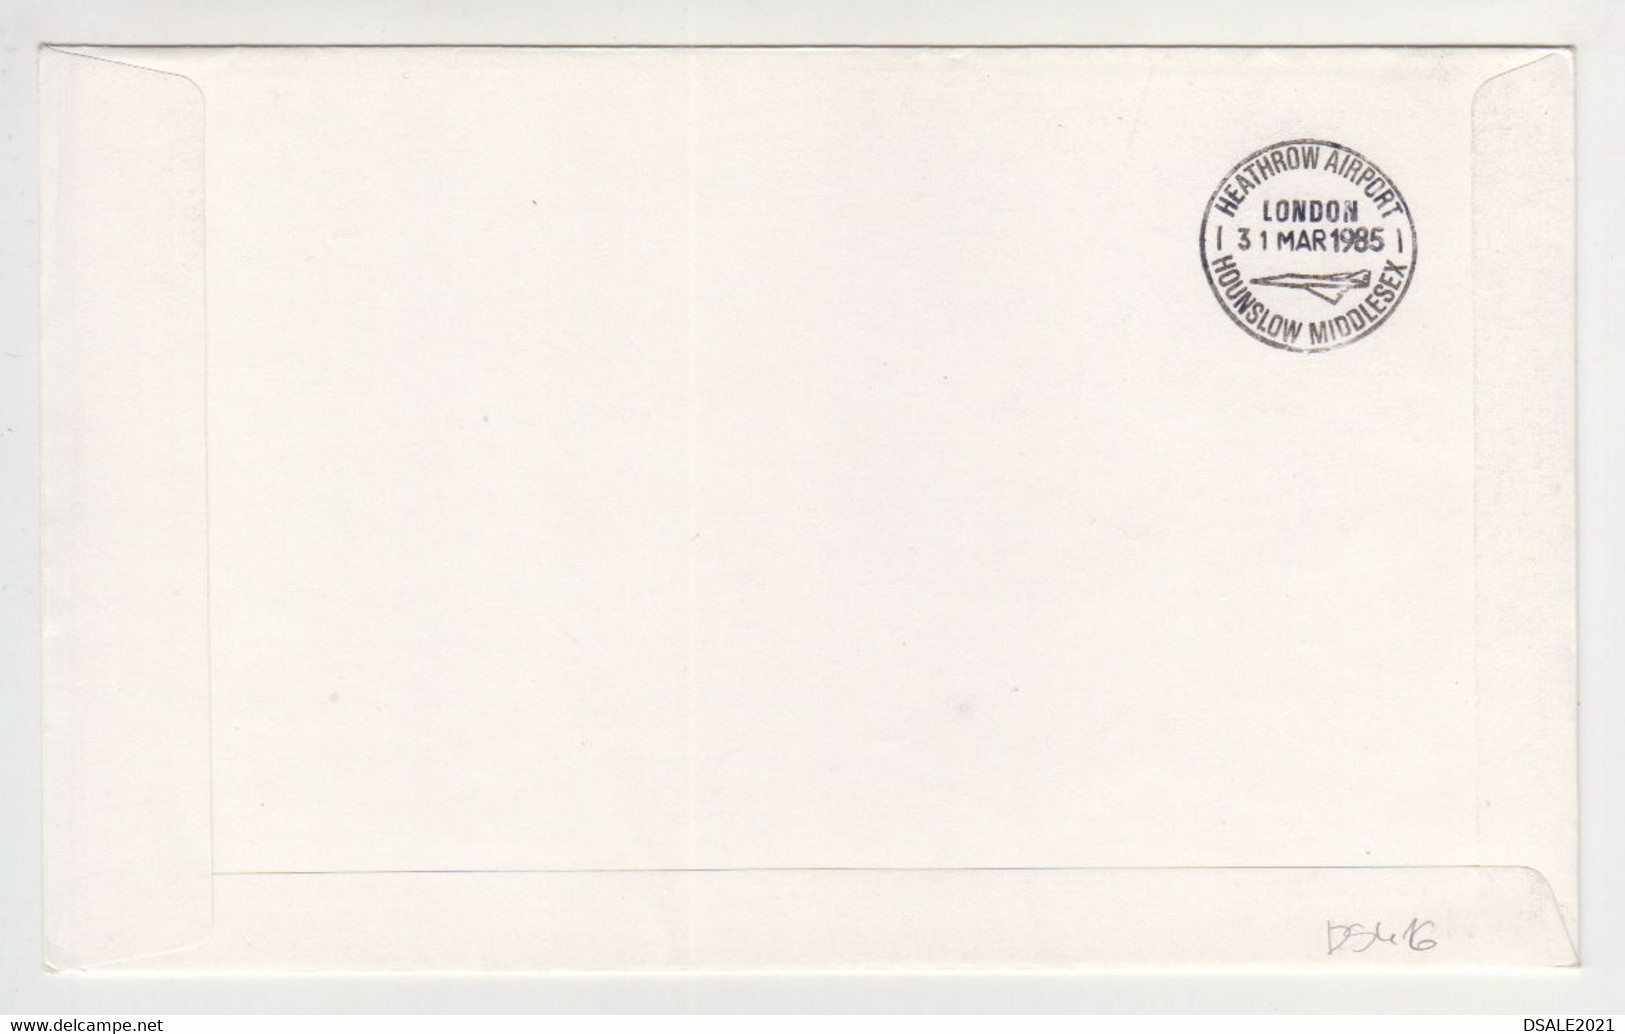 Luxembourg Cover CONCORDE - 1985 British Airways Luxembourg To London Official First Flight Flown Cover (ds416) - Covers & Documents